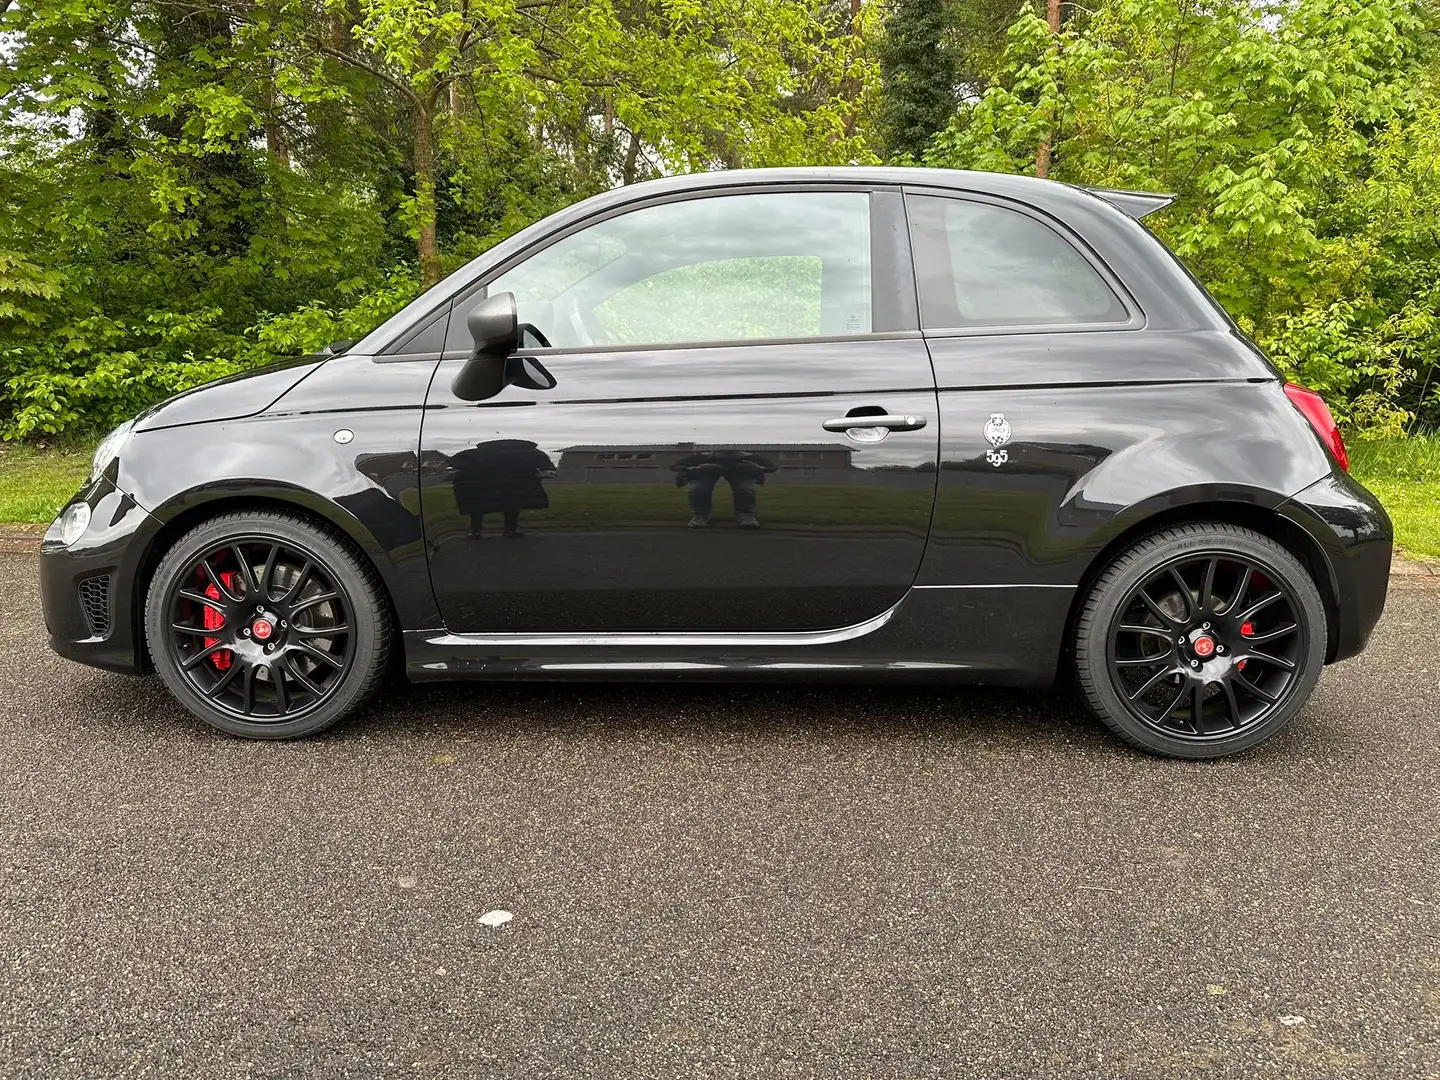 Abarth 595 Competizione 1.4 T-JET Abarth Corsa By Sabelt Carbon Leder Czarny - 2